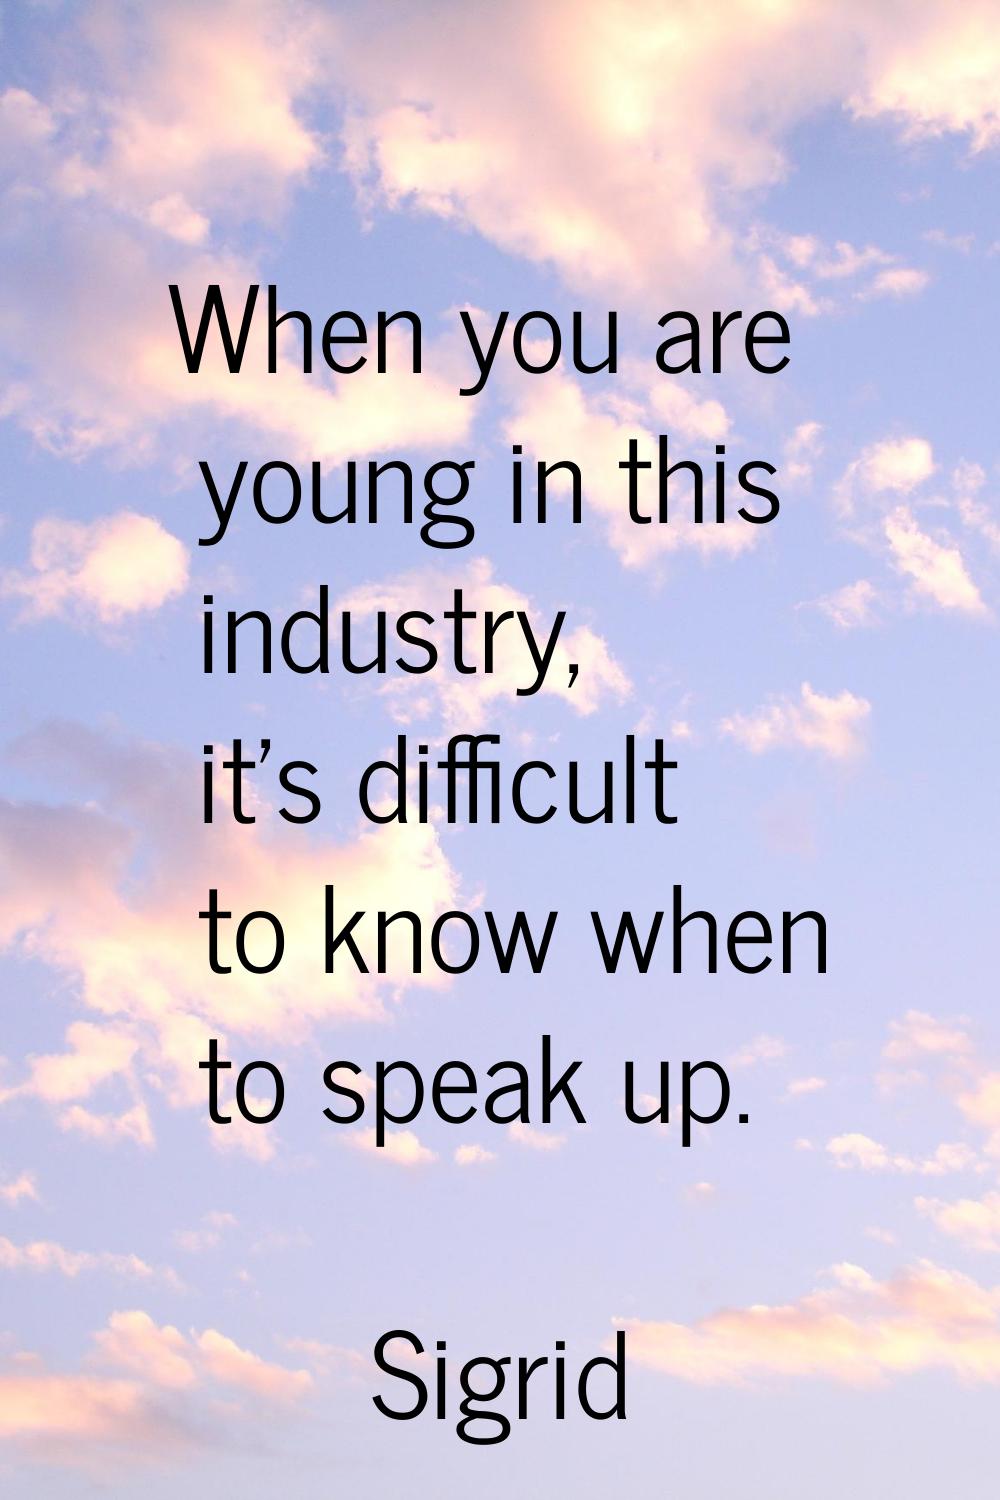 When you are young in this industry, it's difficult to know when to speak up.